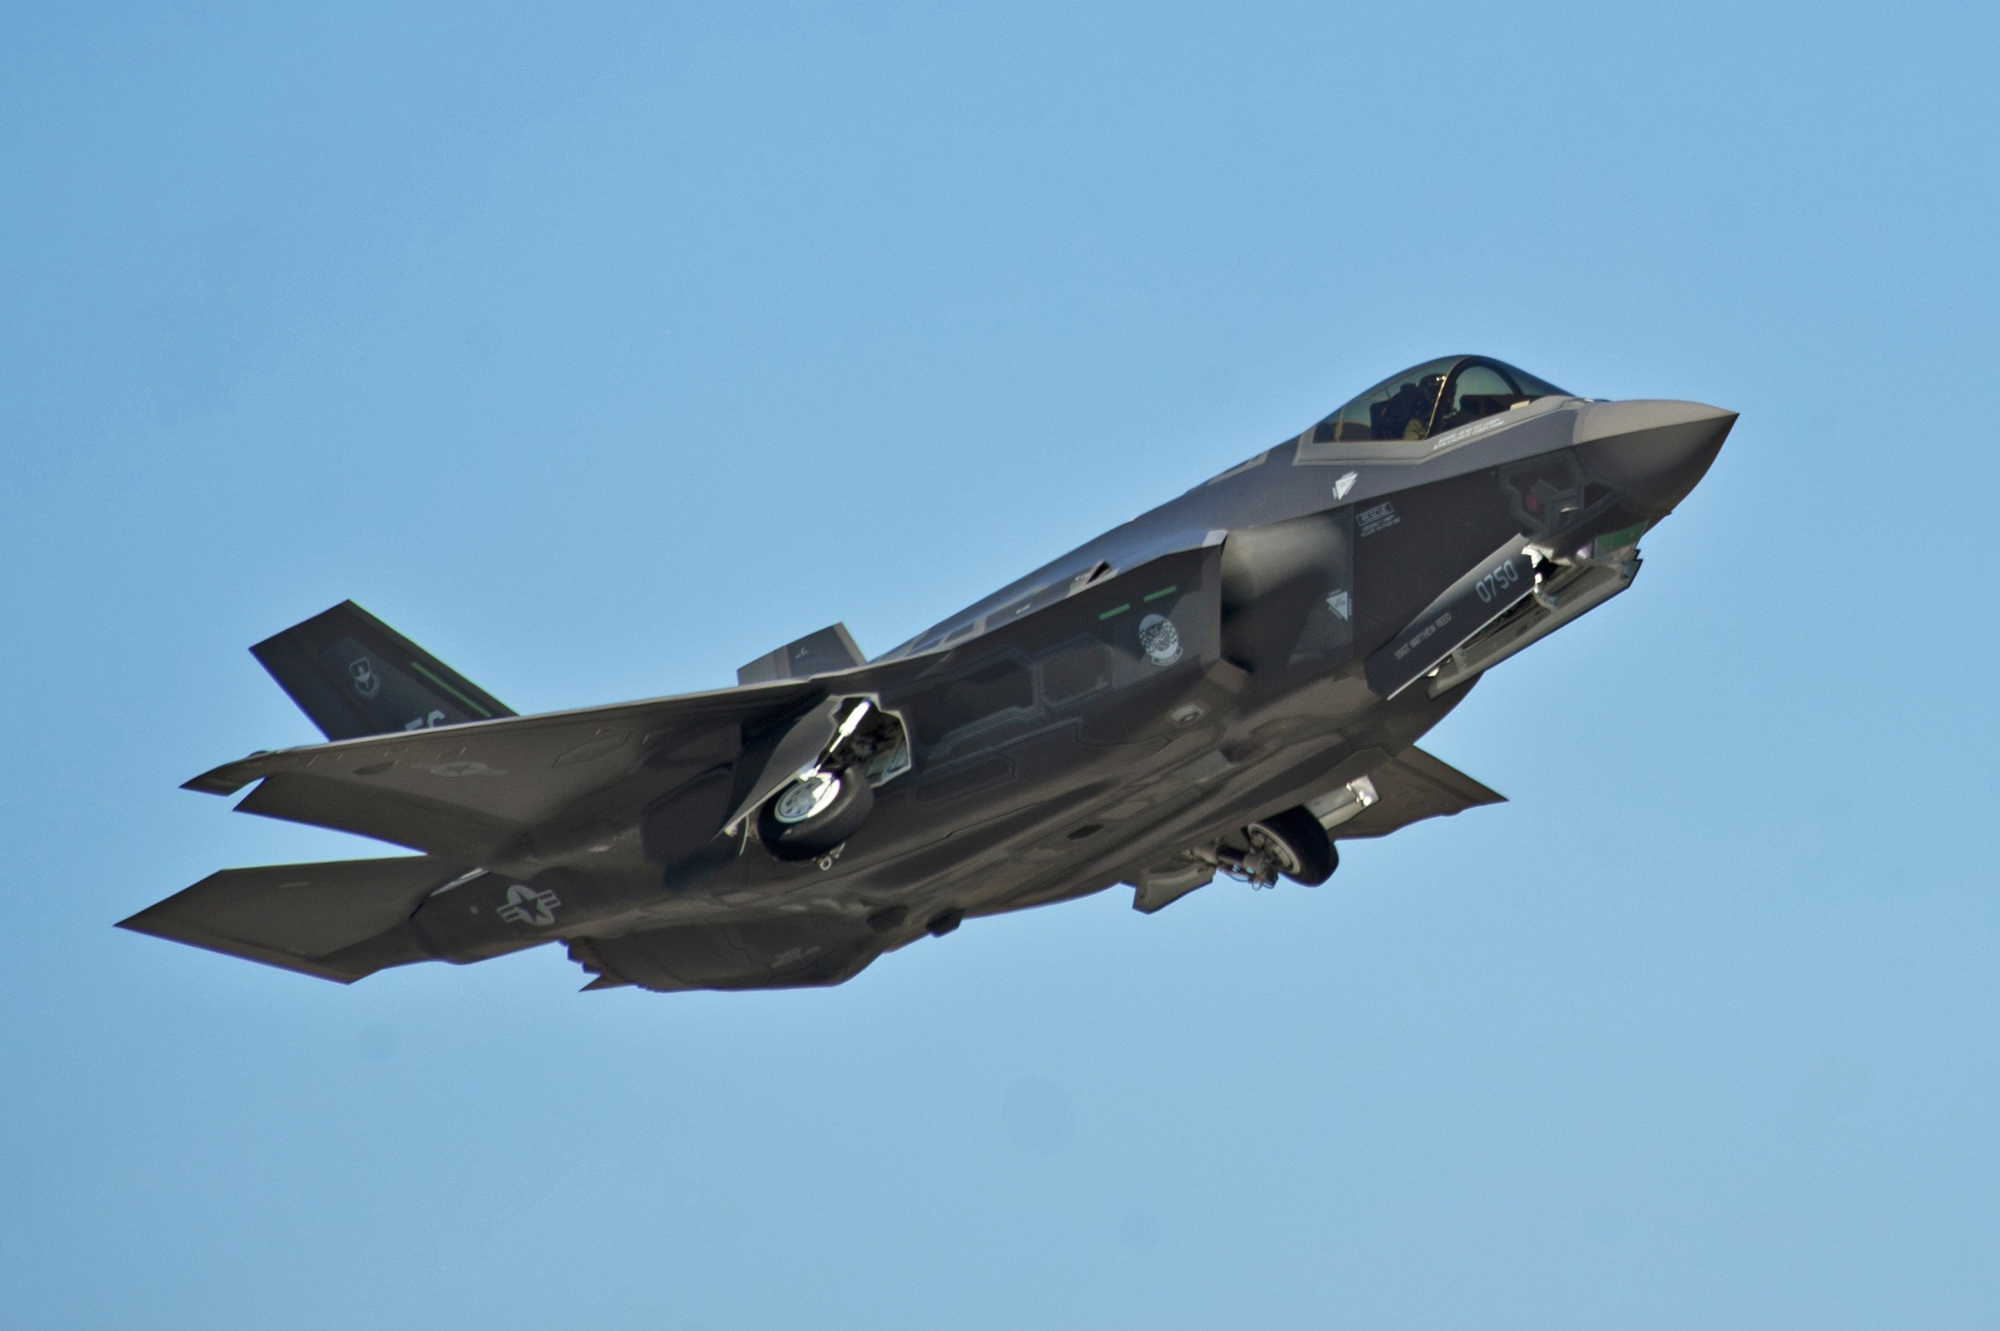 An F-35A Lightning II Joint Strike Fighter takes off on a training sortie at Eglin Air Force Base, Florida in 2012.